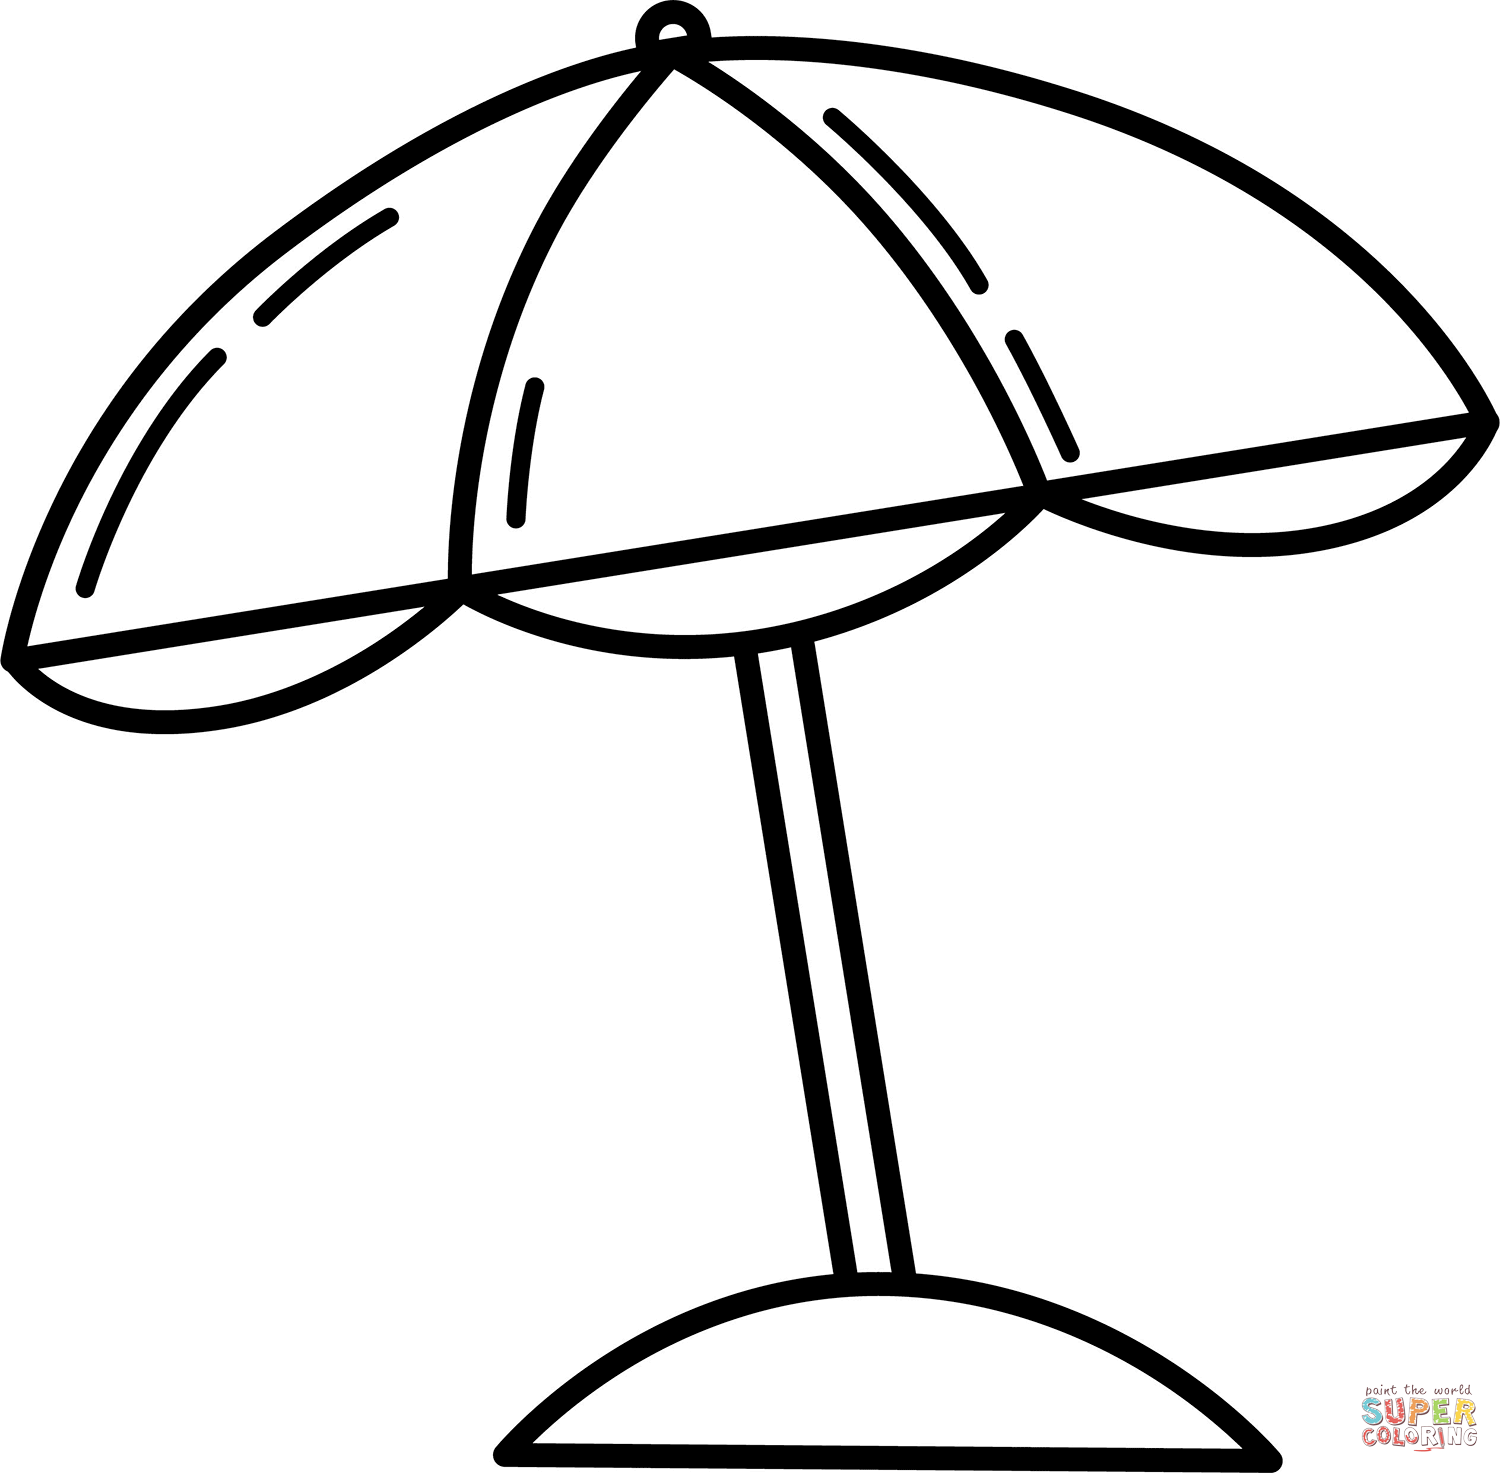 Beach umbrella coloring page free printable coloring pages